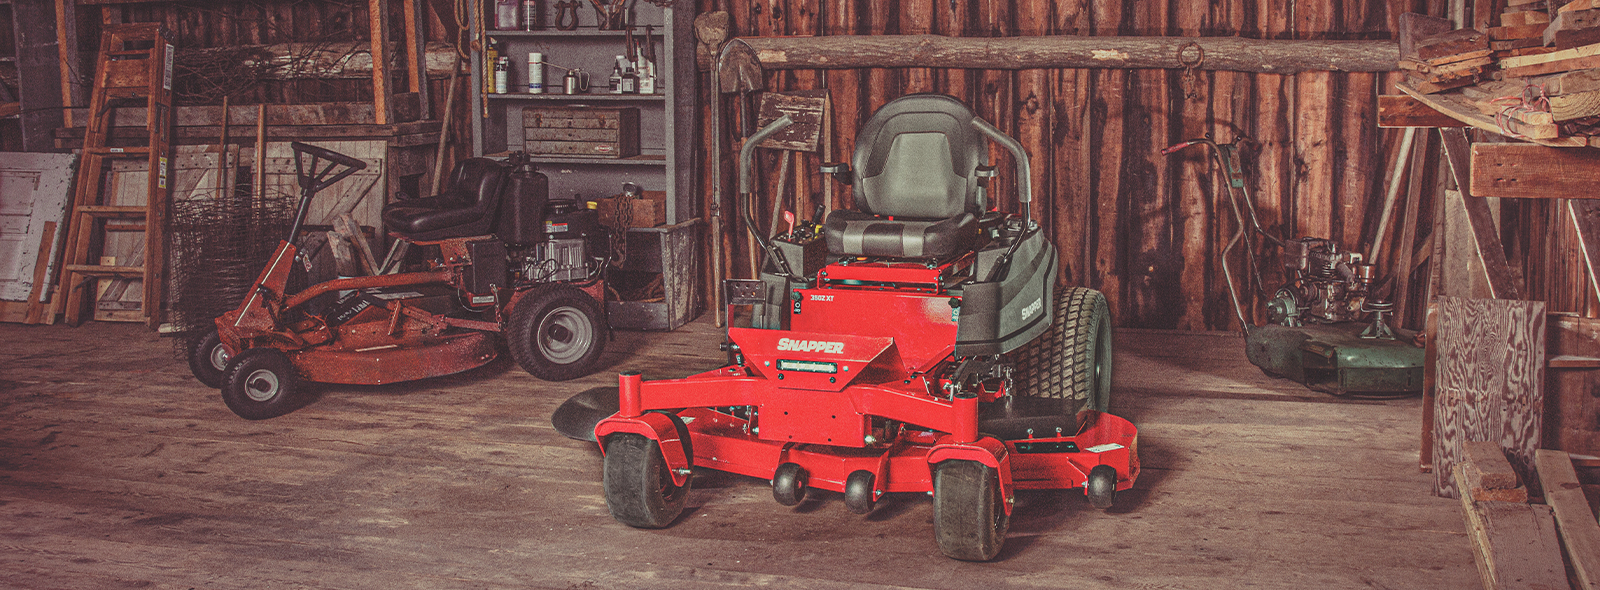 New Snapper mower in a garage next to an older model